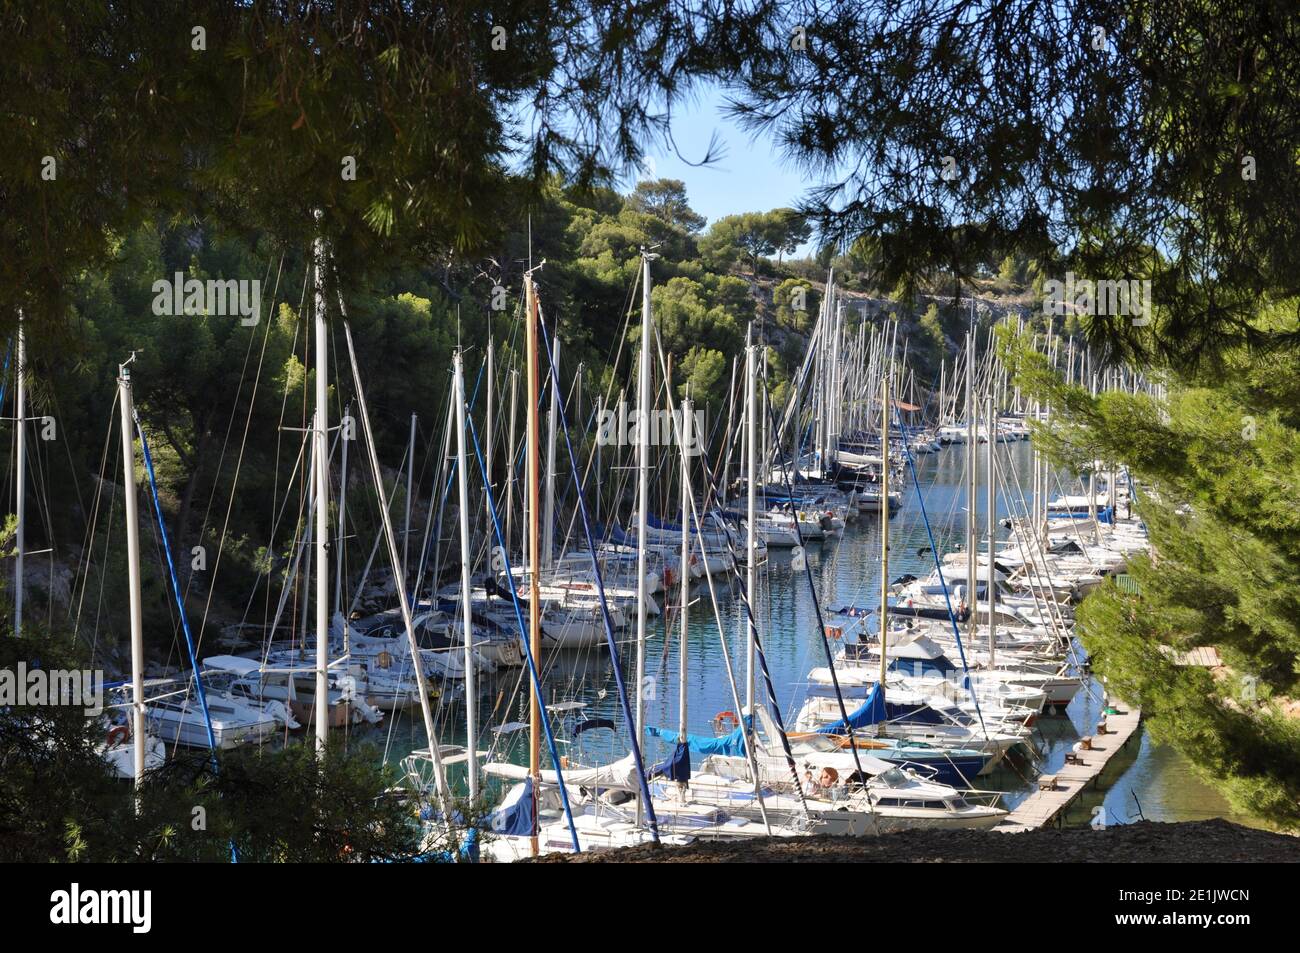 Boats at the Calanques de Port-Miou, Cassis, France Stock Photo